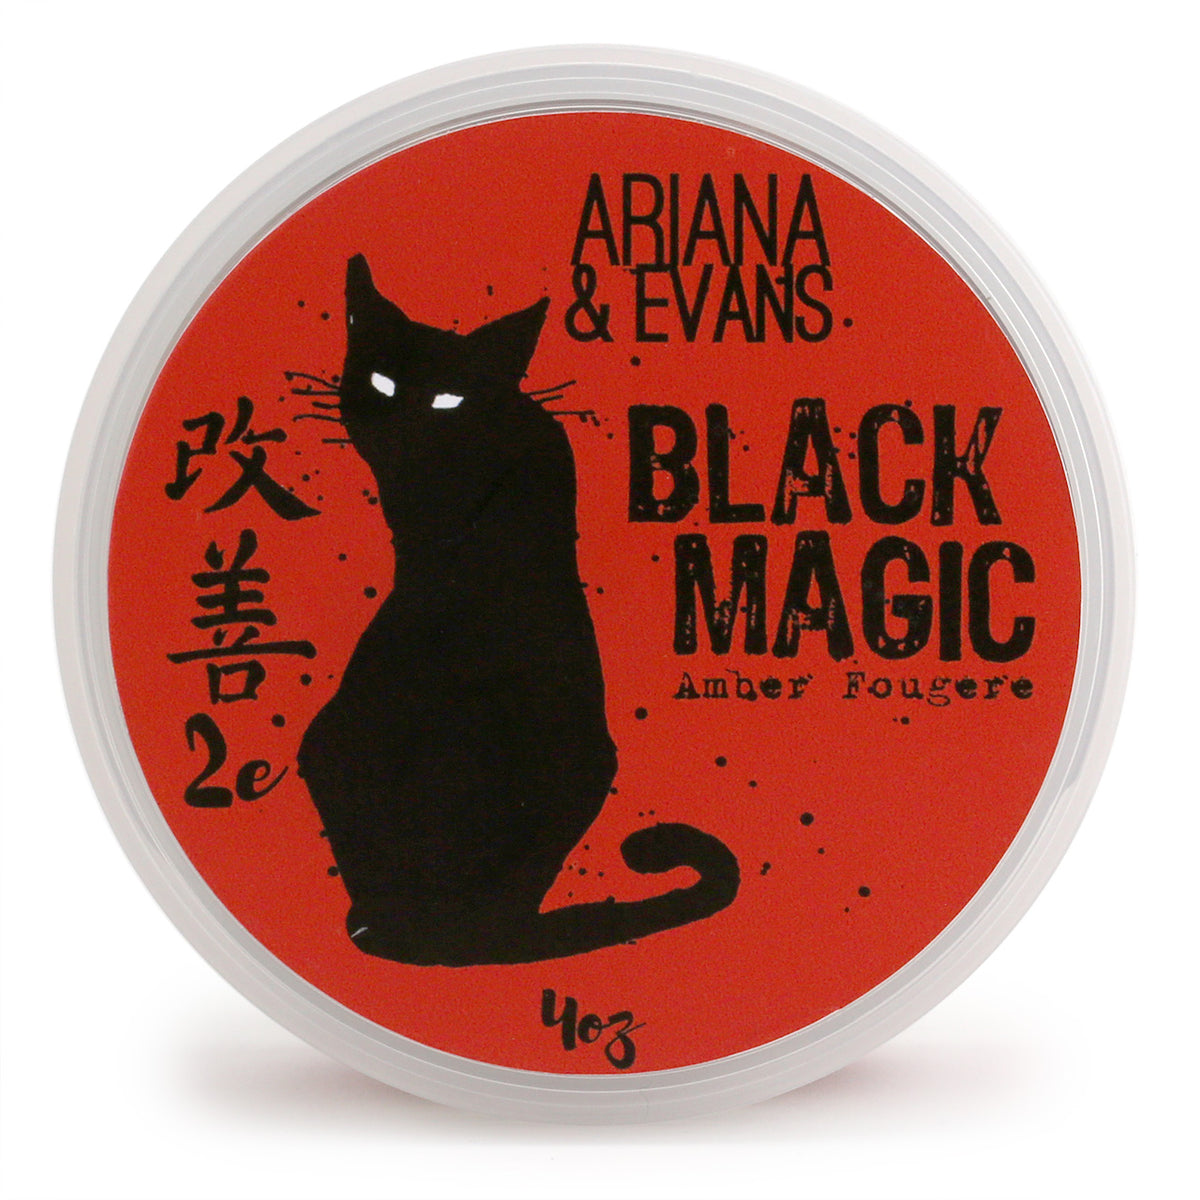 Ariana &amp; Evans Black Magic Shaving Soap view of top label which is red with a black cat looking backward over his shoulder with clear white eyes